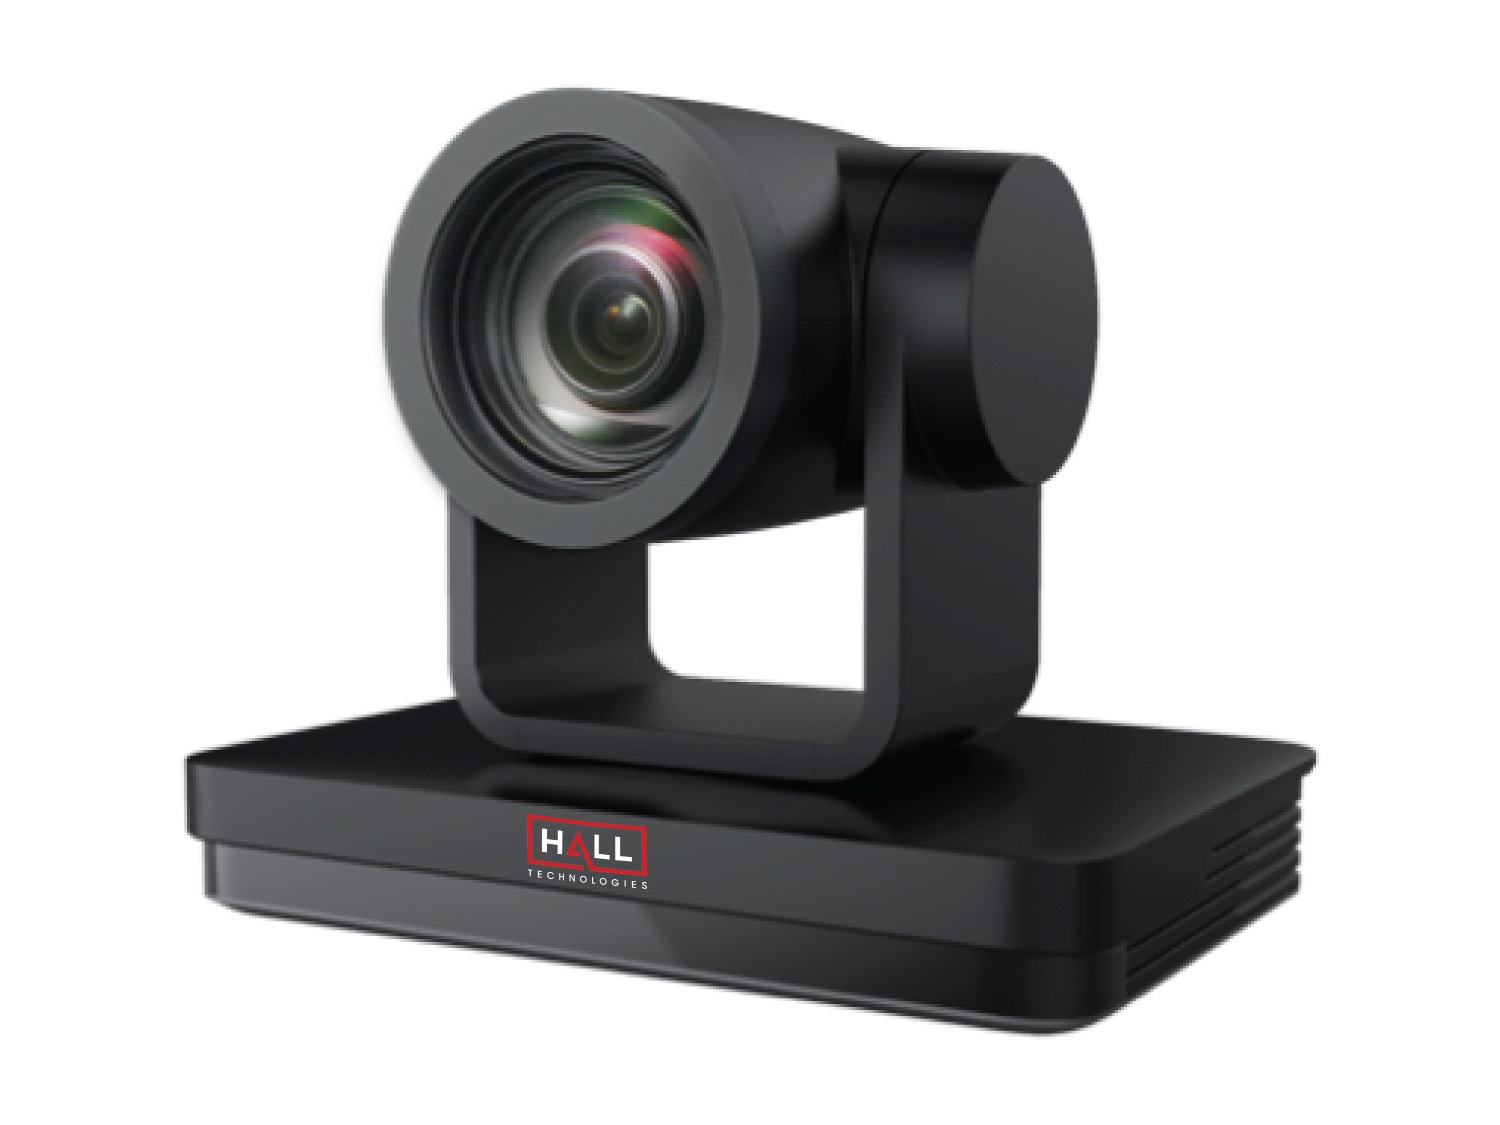 Hall Technologies Cameras and Streaming